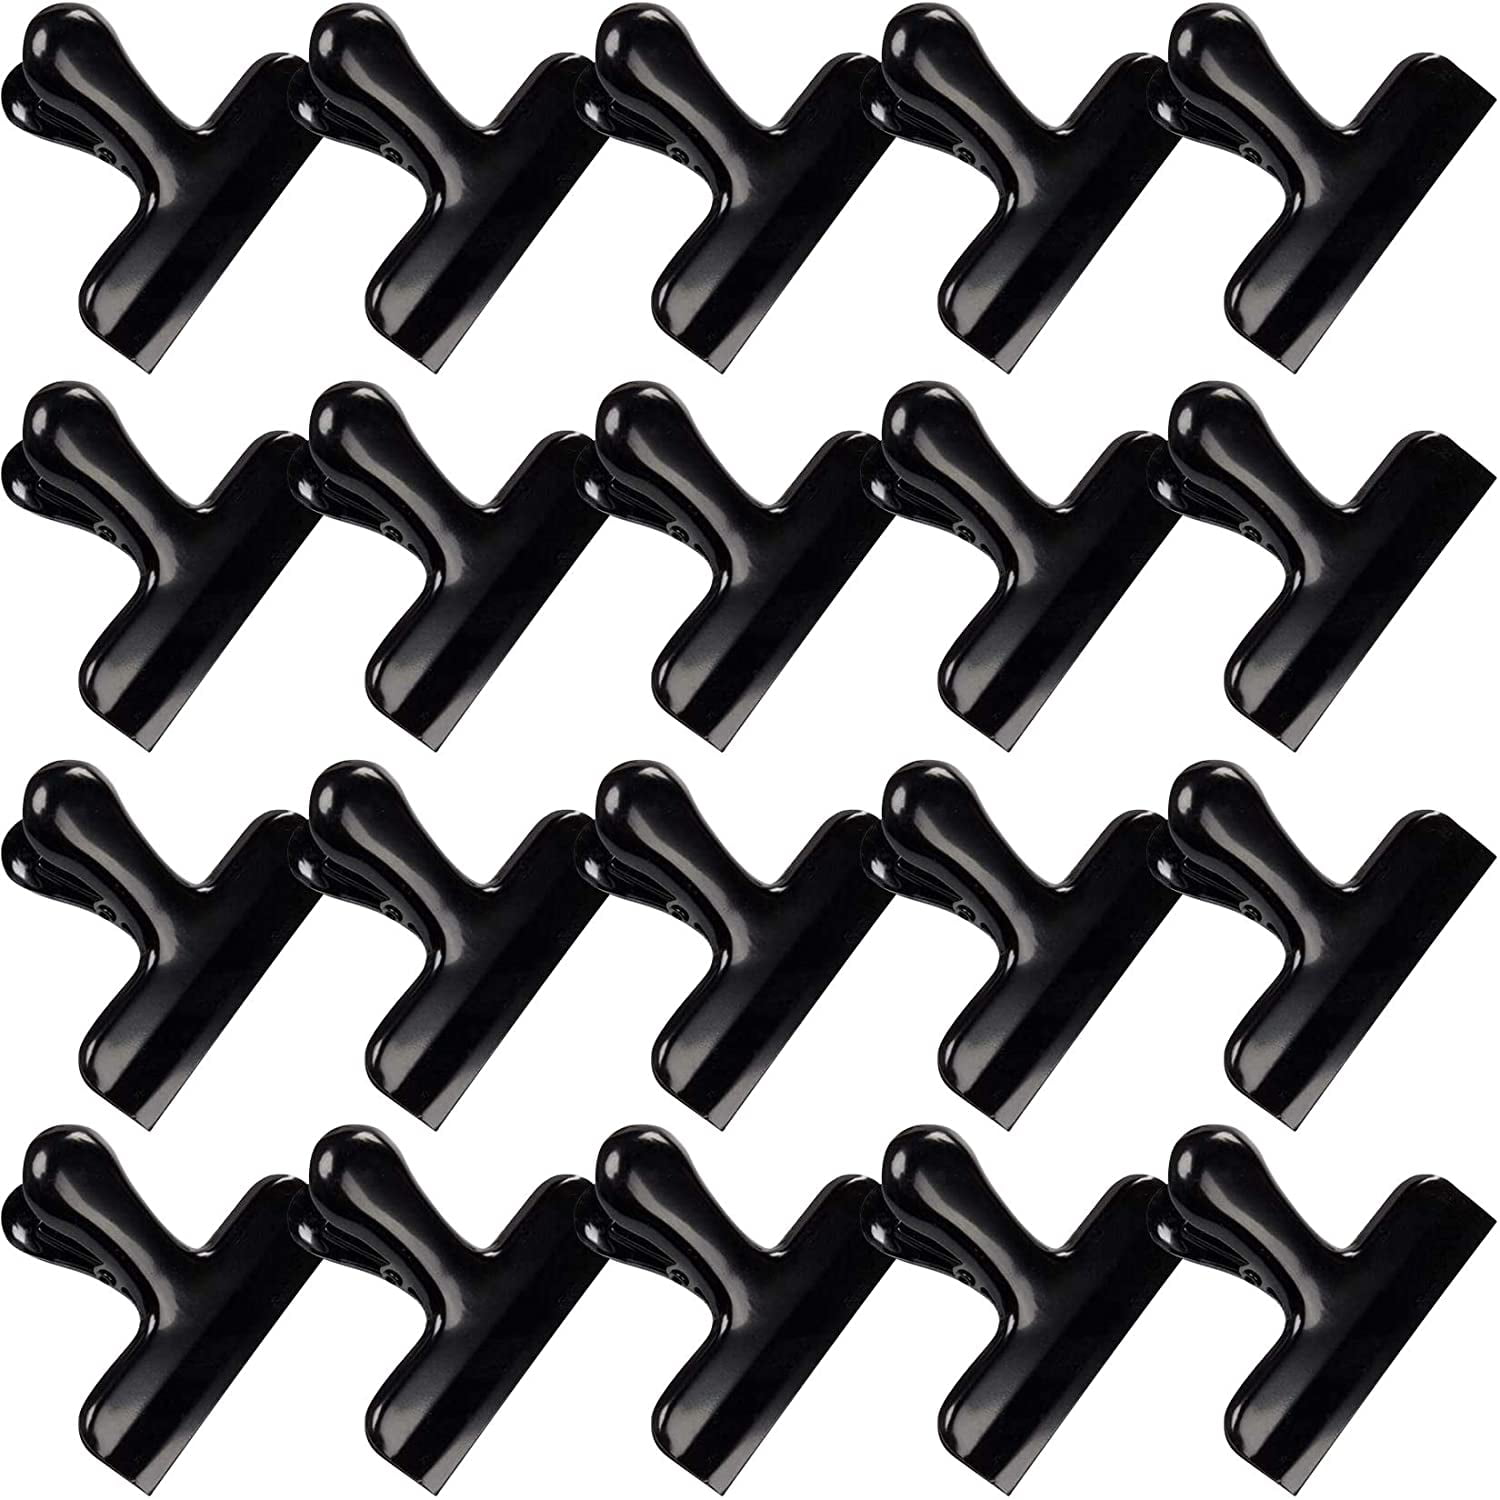 10Pcs Multi-Purpose Metal Clips Holders Chip Bag Document Wire Profs Clips F9T8 